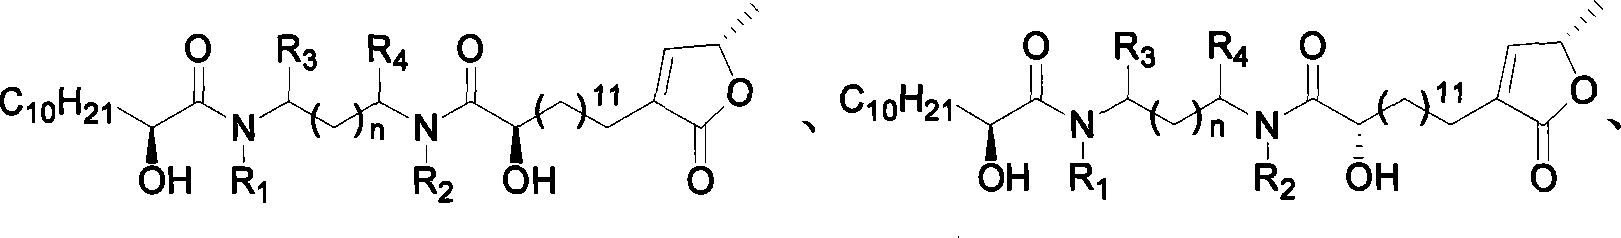 Lactone compound of sweetsop connected through amido bond, synthetic method and application